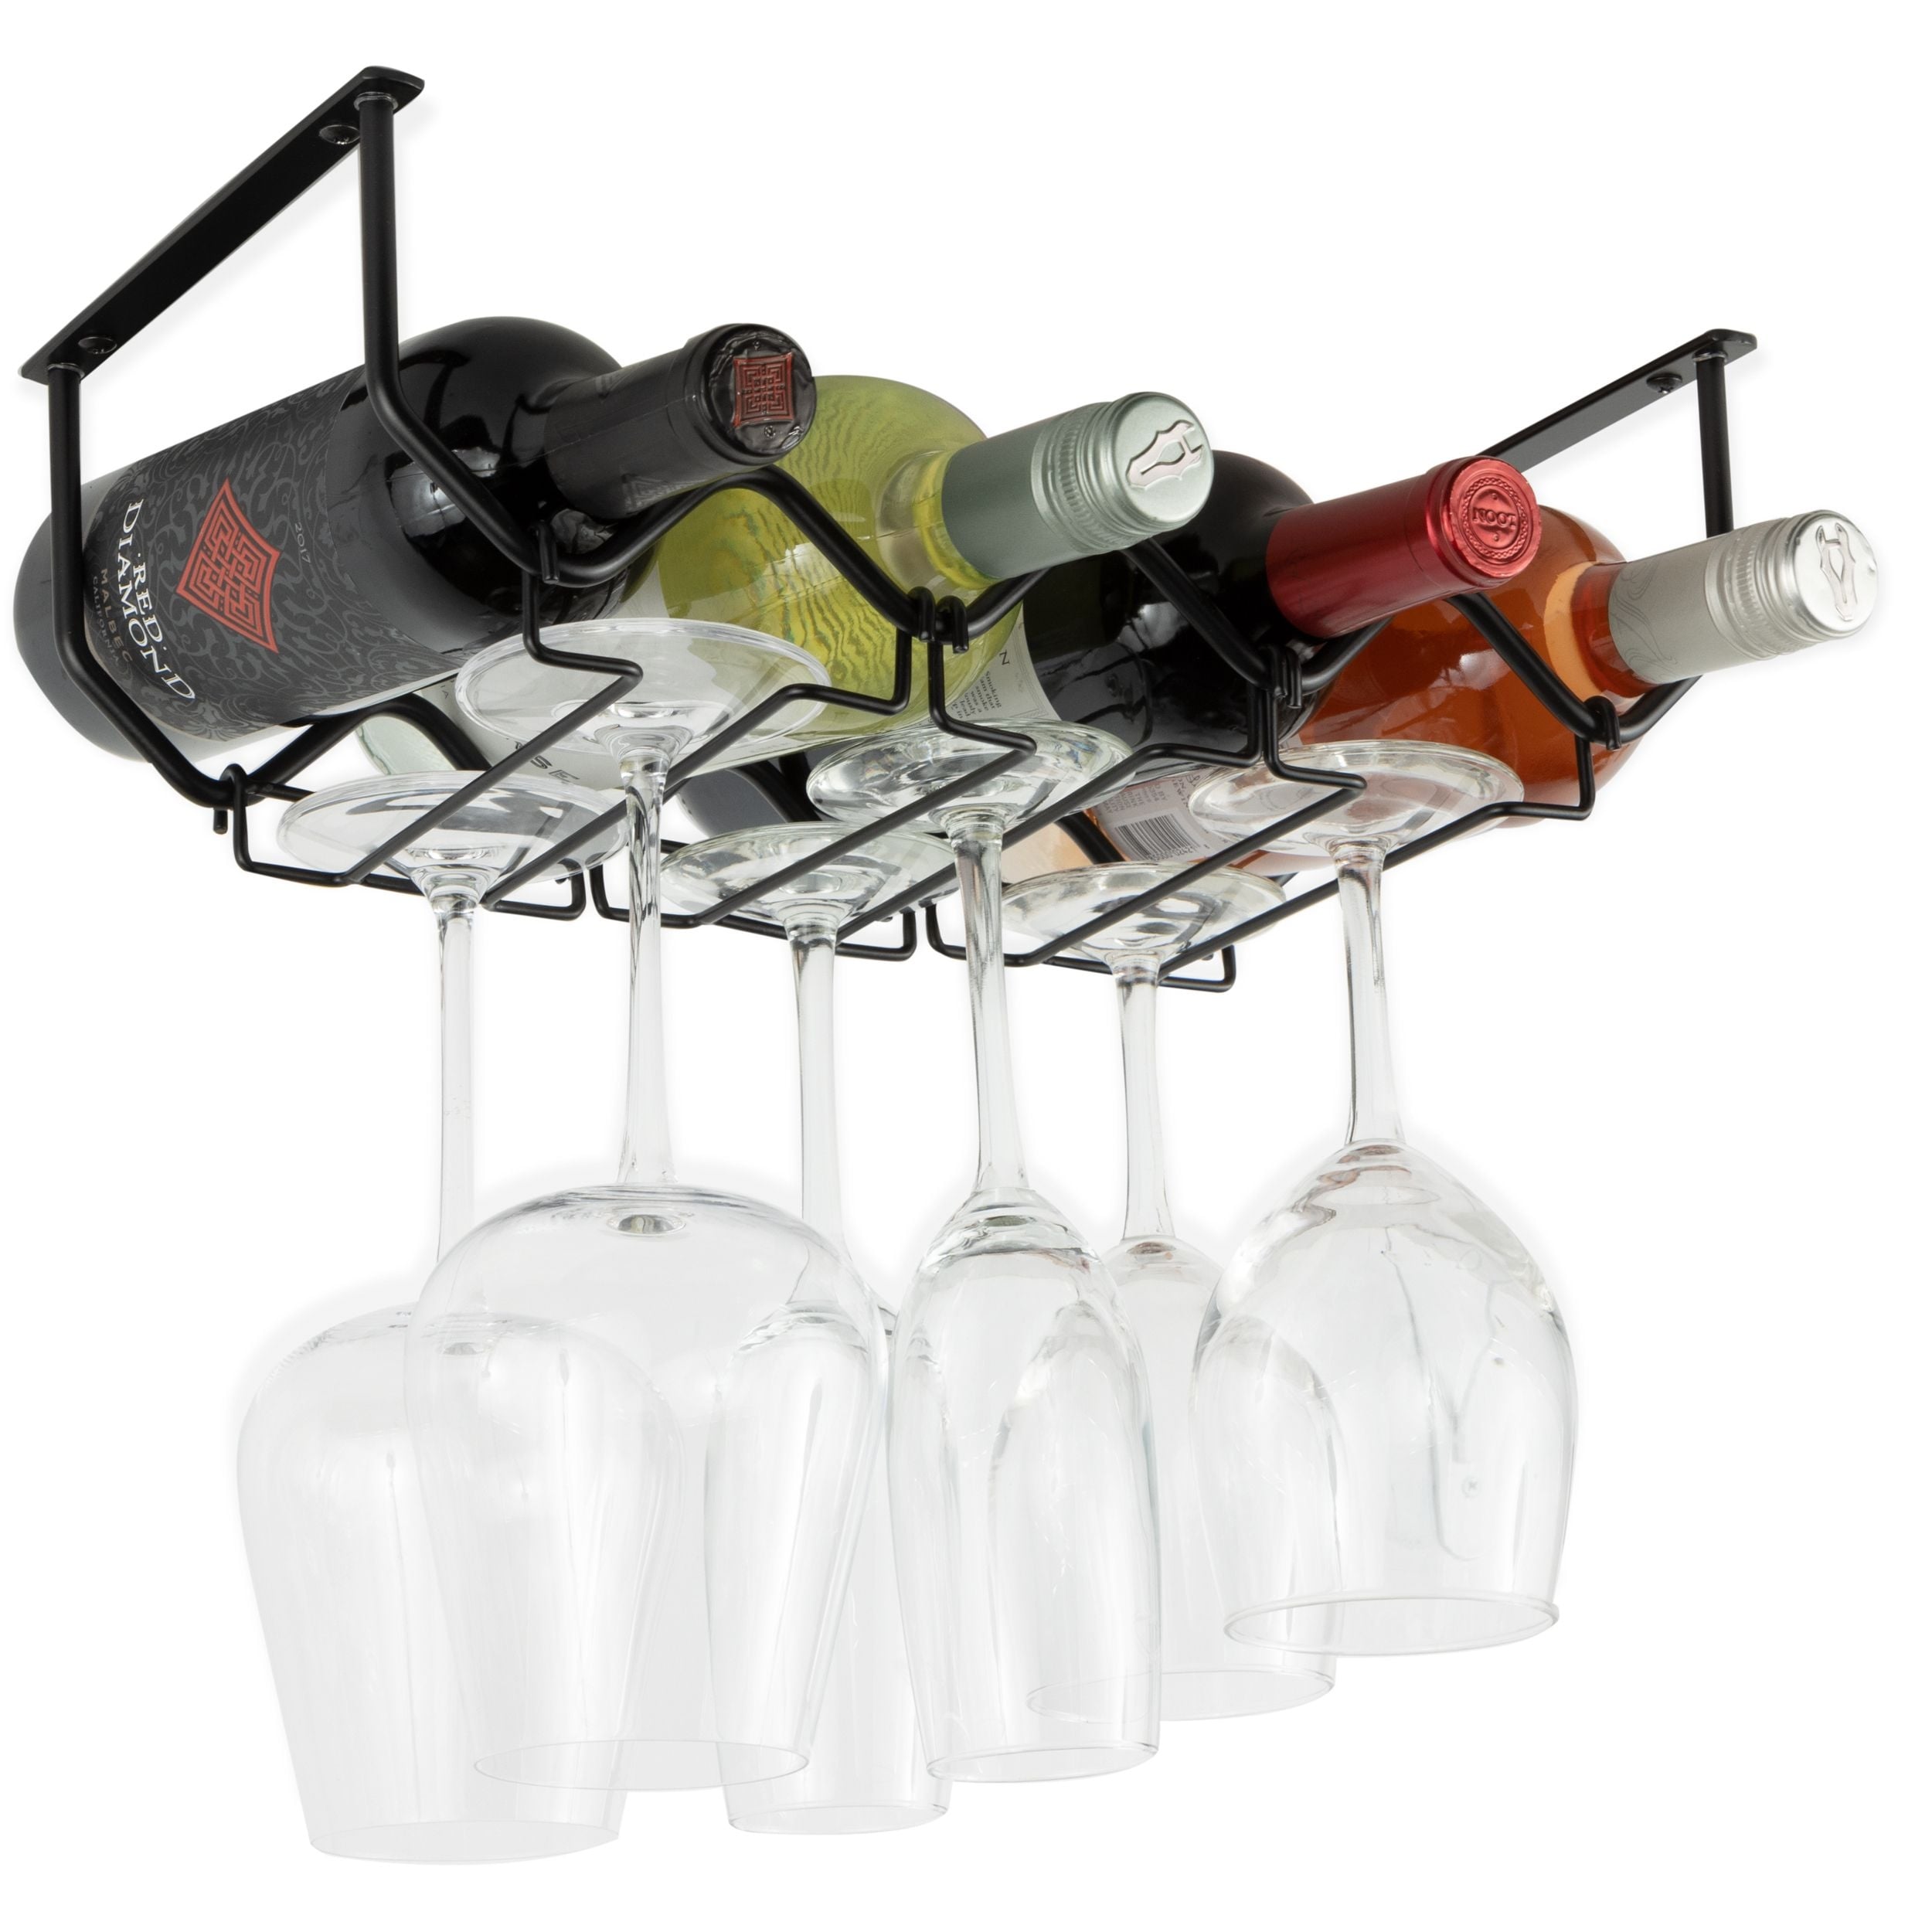 https://ak1.ostkcdn.com/images/products/is/images/direct/0067d43a74c356eddb6afb049ab98ee53e820d71/Wallniture-Piccola-Under-Cabinet-Wine-Bottle-Holder-and-Stemware-Rack.jpg